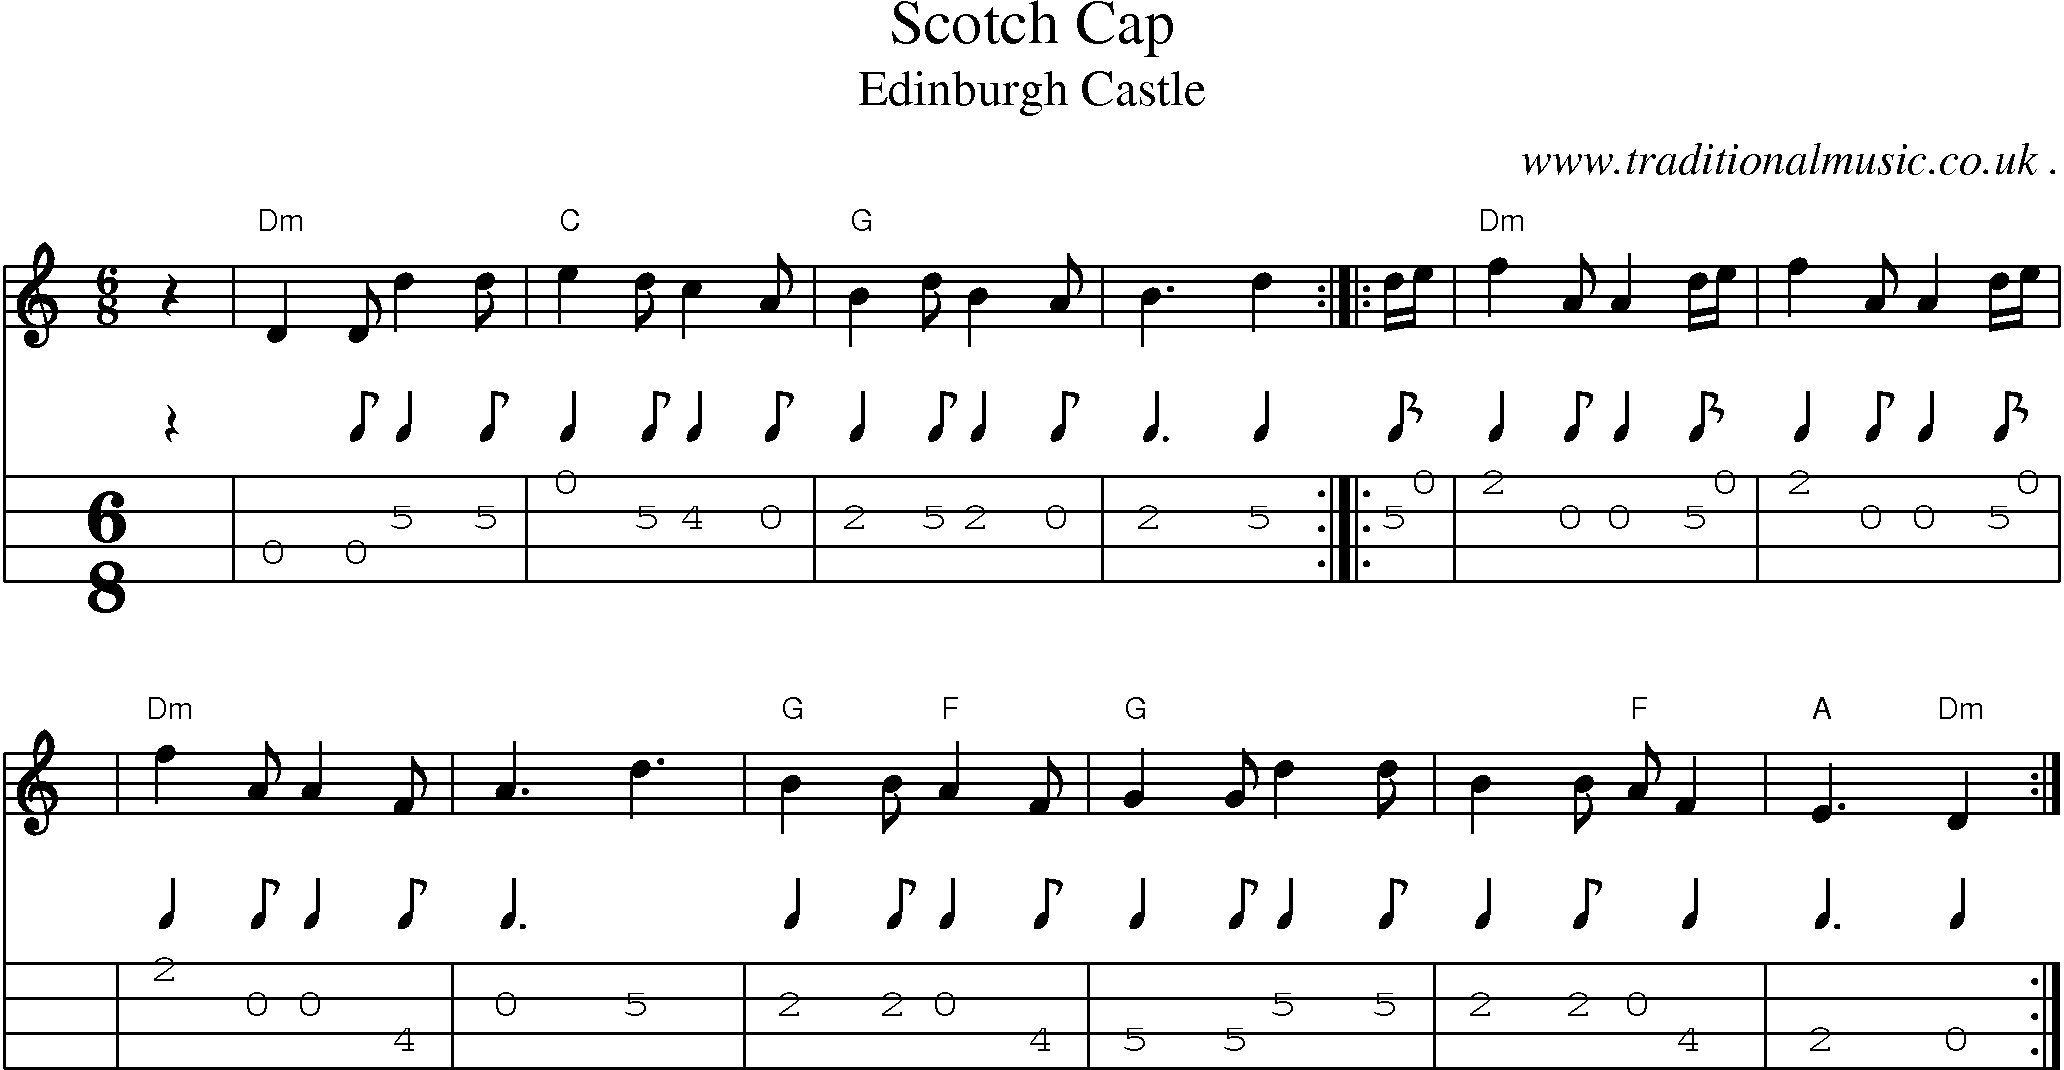 Sheet-music  score, Chords and Mandolin Tabs for Scotch Cap